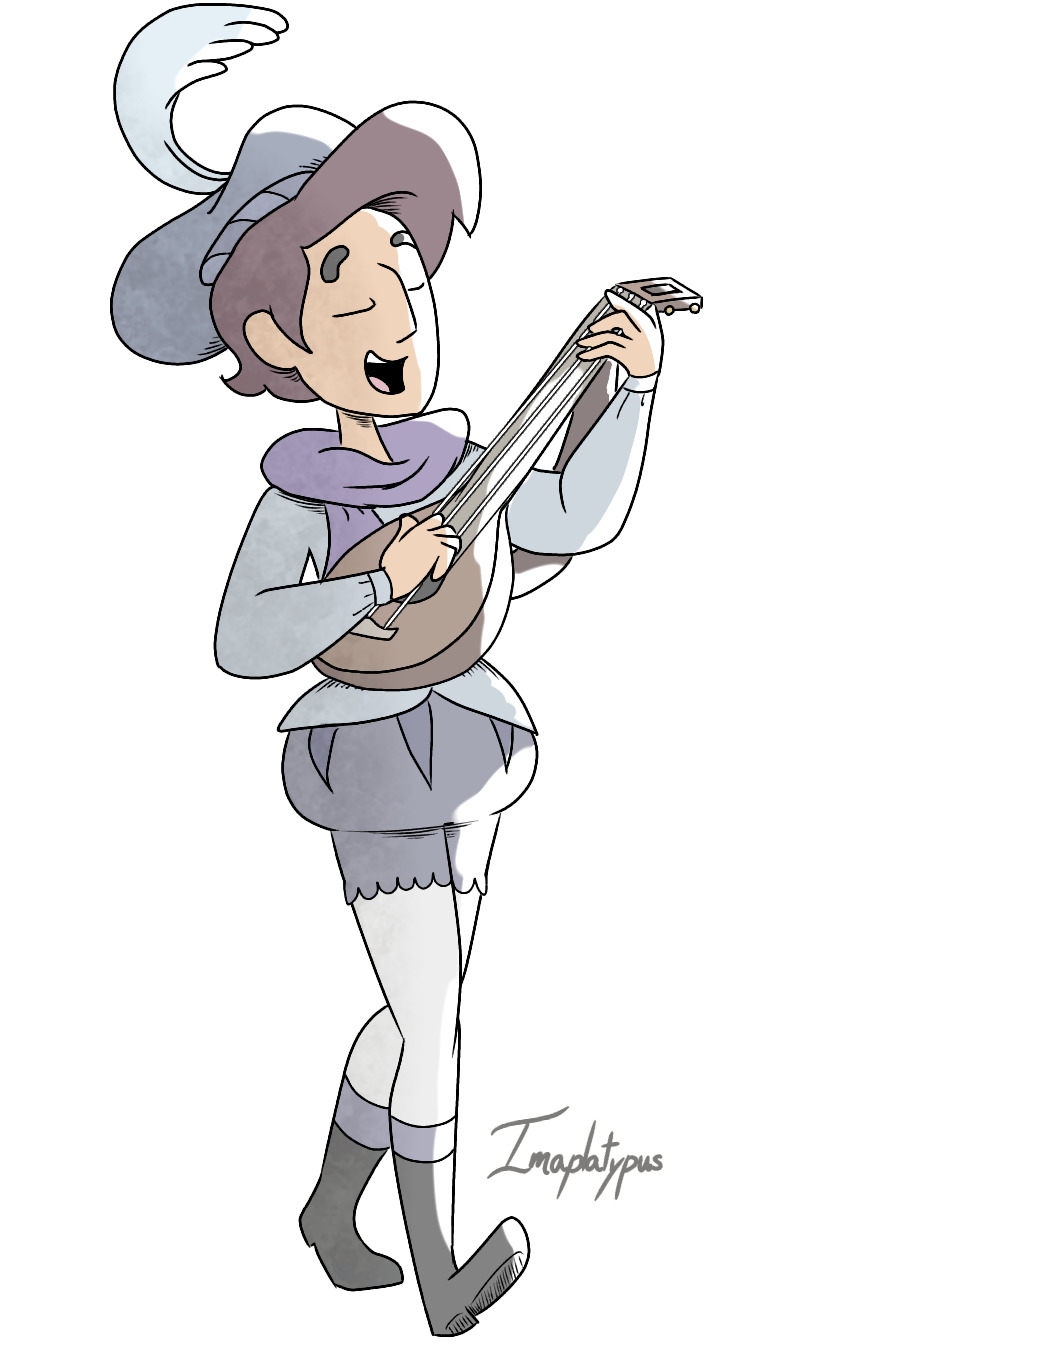 Jamie dressed as Ruberiot the songstrel Because Ruberiot’s outfit reminded me of the outfit Jamie wore in Love Letters(I do believe that steven was imagining him in it but whatever)lol